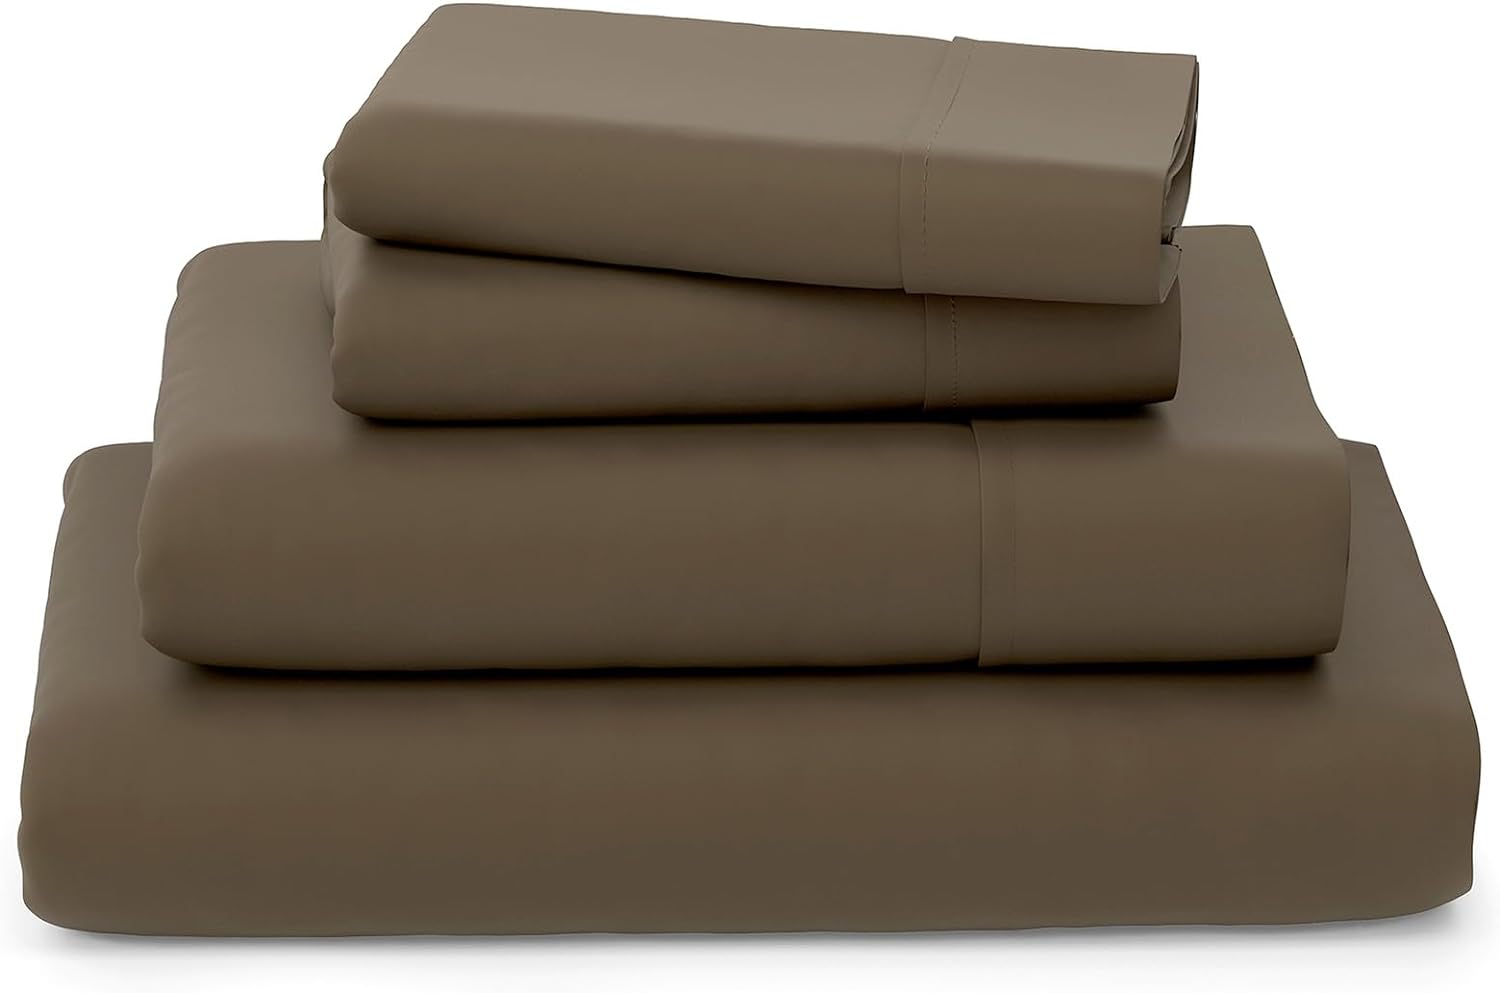 Cosy House Collection Luxury Bamboo Sheets - Blend of Rayon Derived from Bamboo - Cooling & Breathable, Silky Soft, 16-Inch Deep Pockets - 5-Piece Bedding Set - Split King, Chocolate